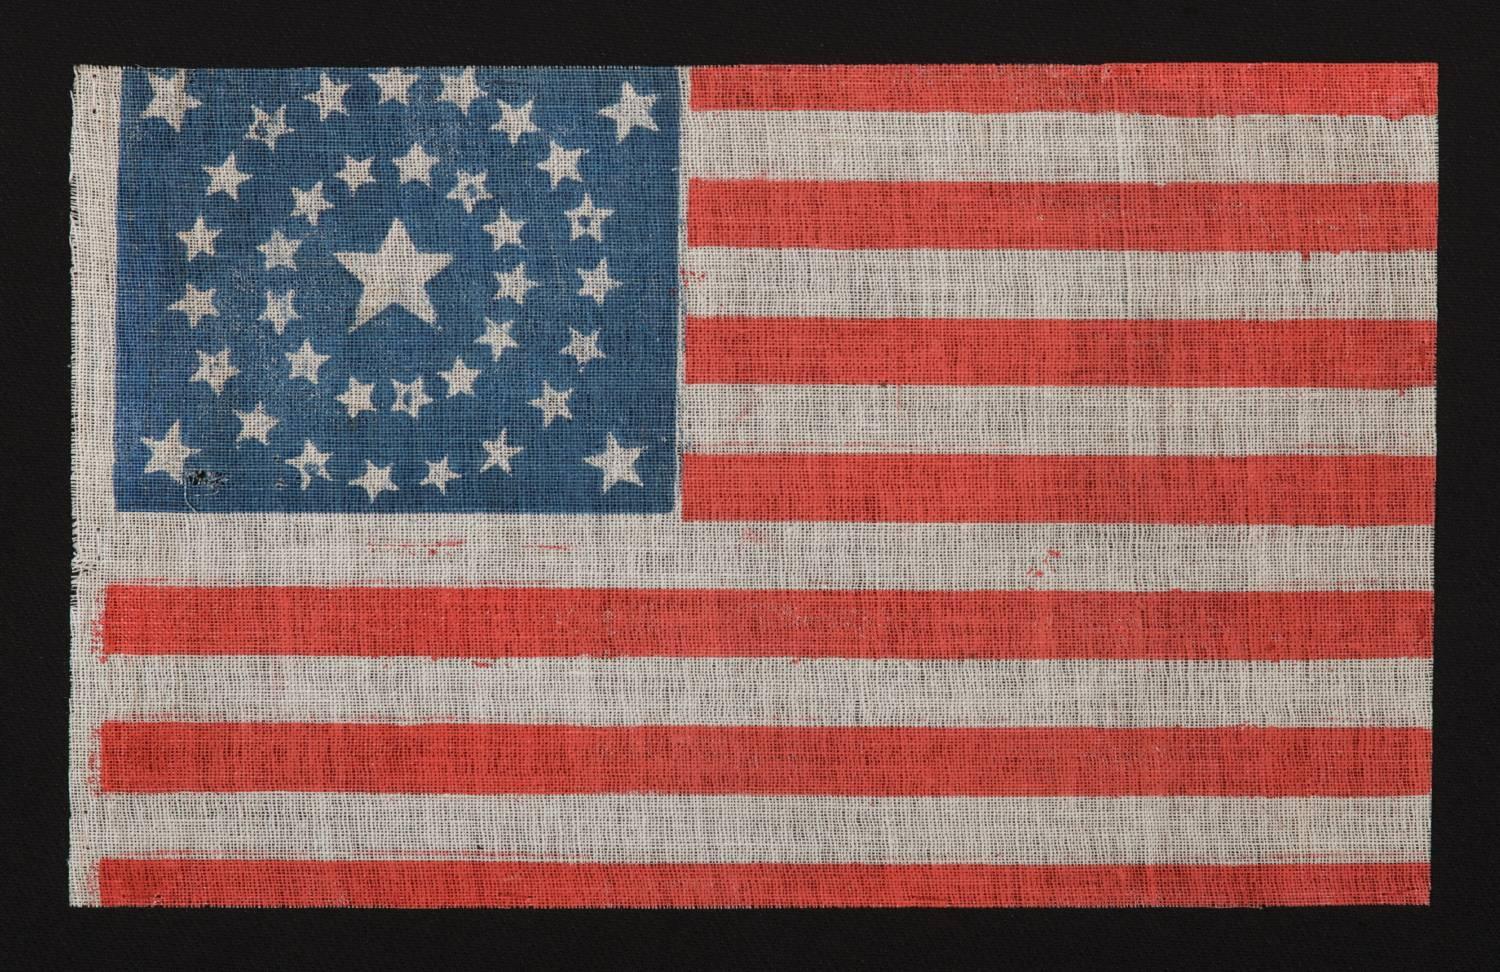 37 STARS IN A MEDALLION CONFIGURATION ONN AN ANTIQUE AMERICAN PARADE FLAG, 1867-1876, NEBRASKA STATEHOOD:

 37-star American national parade flag, printed on coarse, glazed cotton. The stars are arranged in a beautiful medallion that consists of